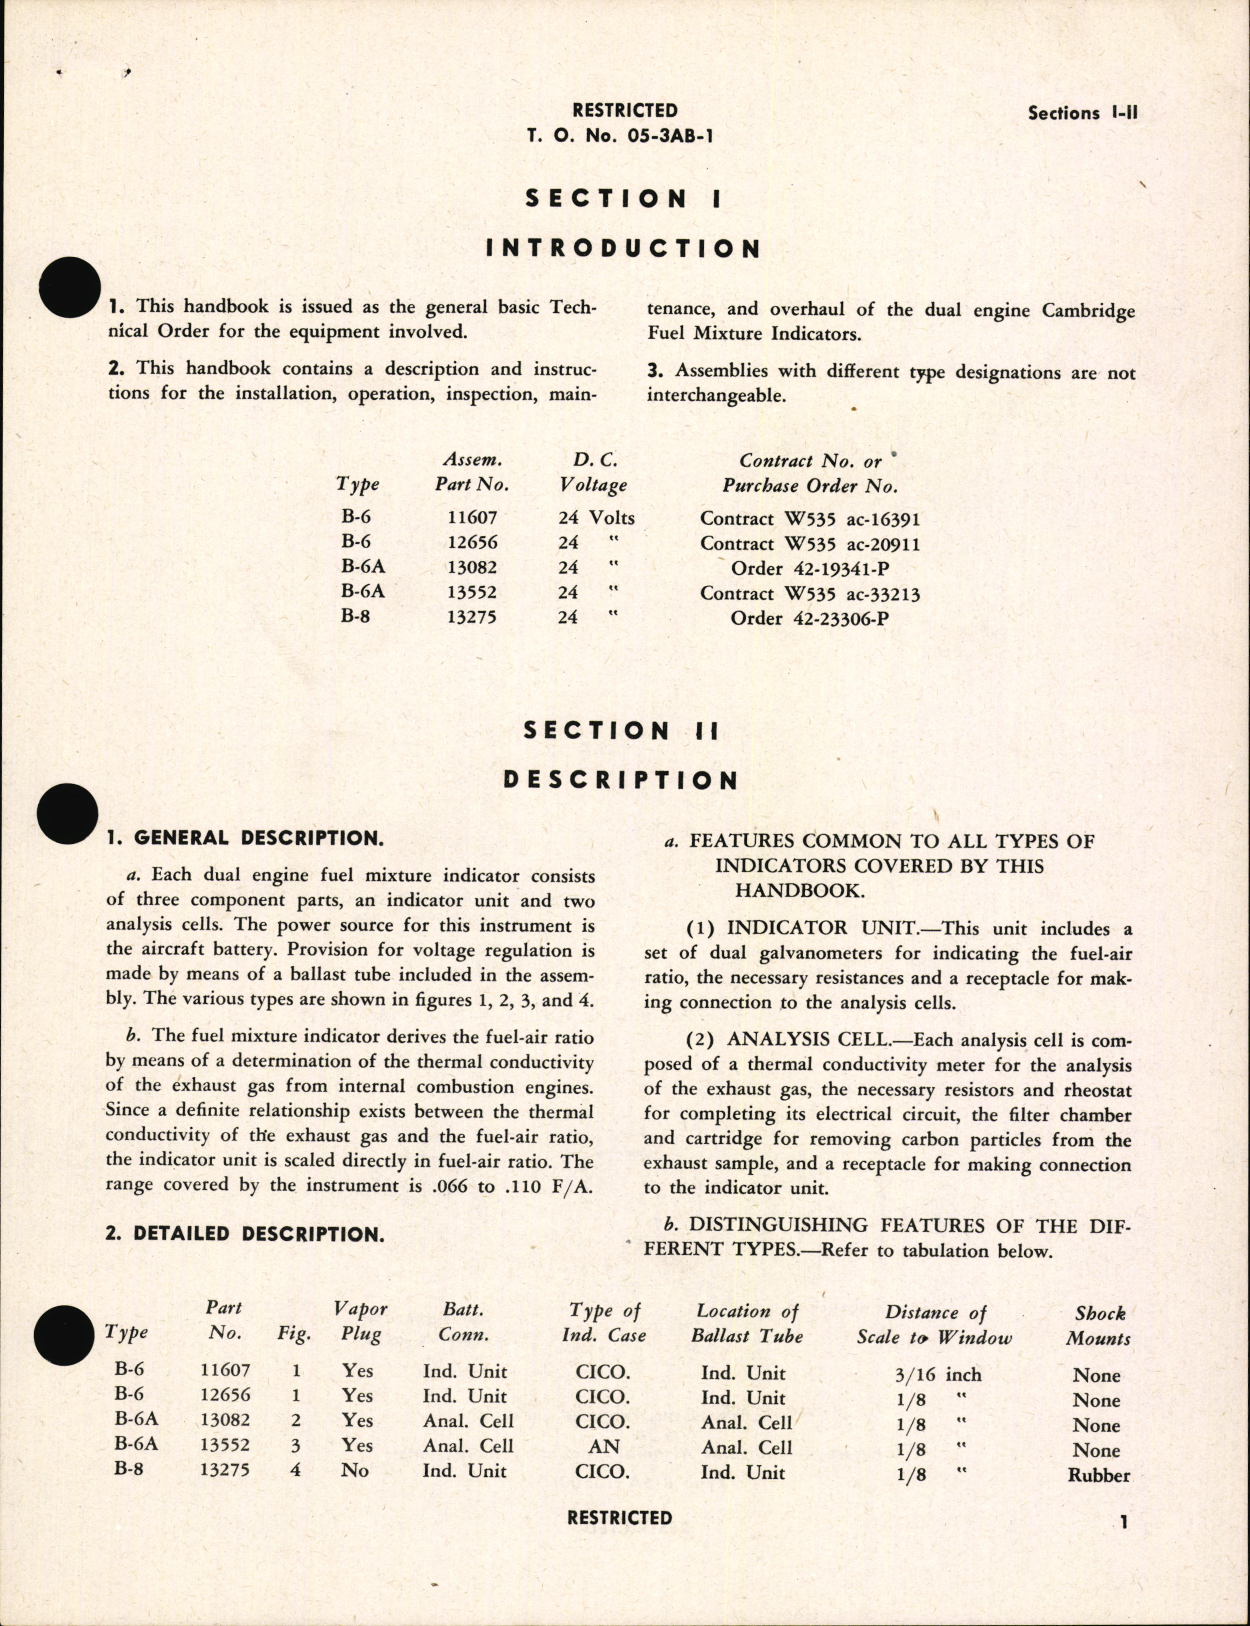 Sample page 7 from AirCorps Library document: Handbook of Instructions with Parts Catalog for Fuel Mixture Indicators